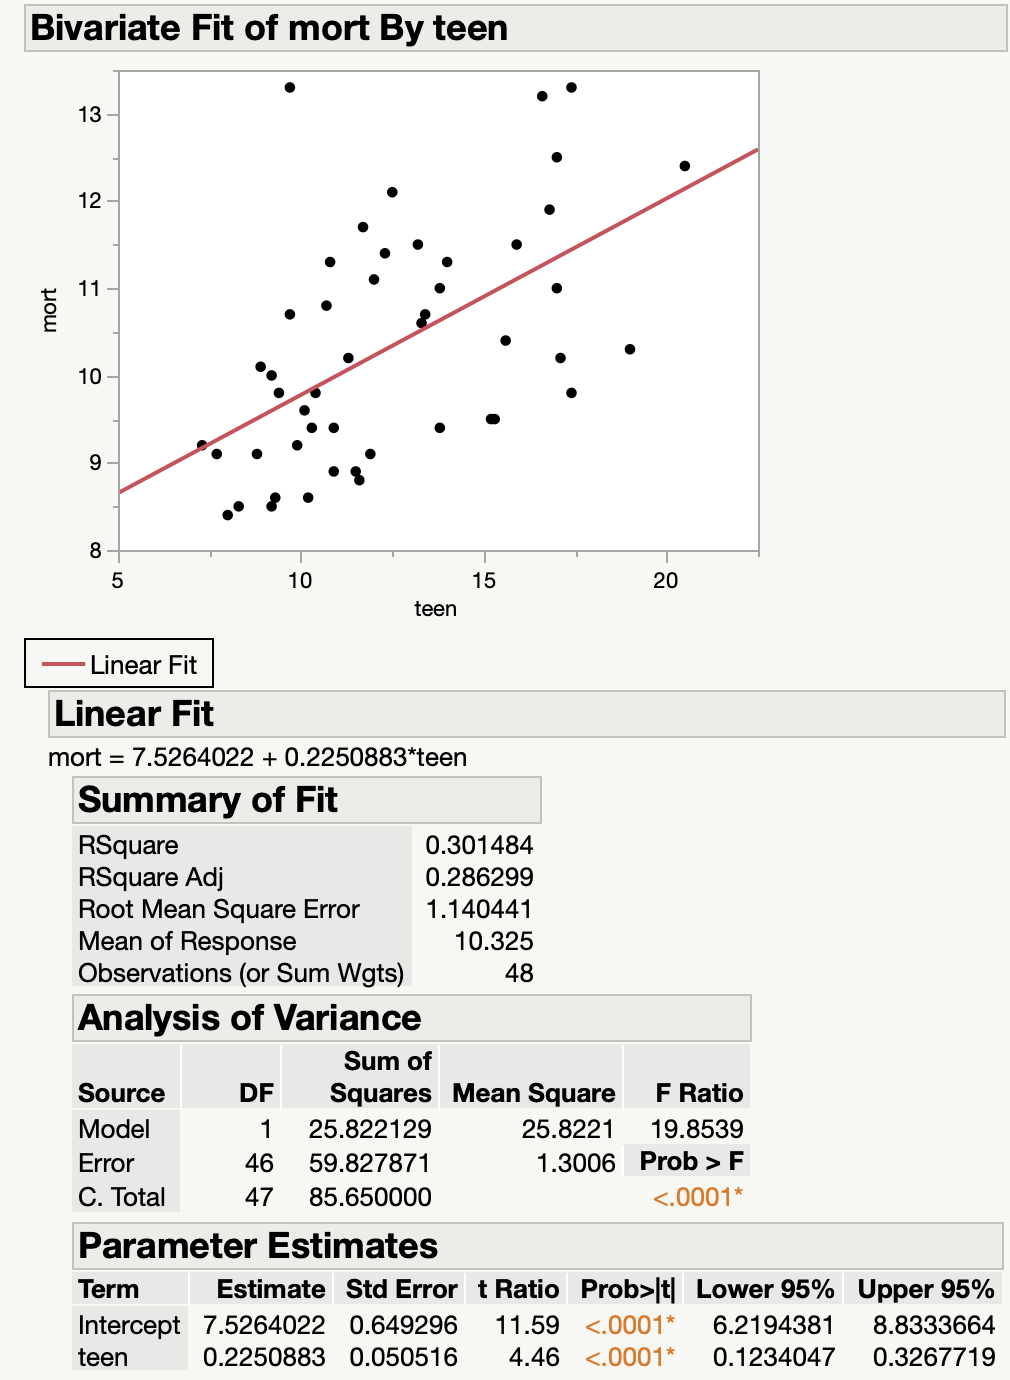 Bivariate Fit of mort By teen
mort
13
12-
11
10-
9-
8
5
RSquare
RSquare Adj
10
- Linear Fit
Linear Fit
mort = 7.5264022 + 0.2250883*teen
Summary of Fit
teen
Source
Model
Error
C. Total
Root Mean Square Error
Mean of Response
Observations (or Sum Wgts)
Analysis of Variance
15
0.301484
0.286299
1.140441
10.325
48
Sum of
DF
Squares Mean Square
1
25.822129
25.8221
46 59.827871
1.3006
47 85.650000
20
F Ratio
19.8539
Prob > F
<.0001*
Parameter Estimates
Term Estimate Std Error t Ratio Prob>|t| Lower 95% Upper 95%
Intercept 7.5264022 0.649296 11.59 <.0001* 6.2194381 8.8333664
teen
0.2250883 0.050516 4.46 <.0001* 0.1234047 0.3267719